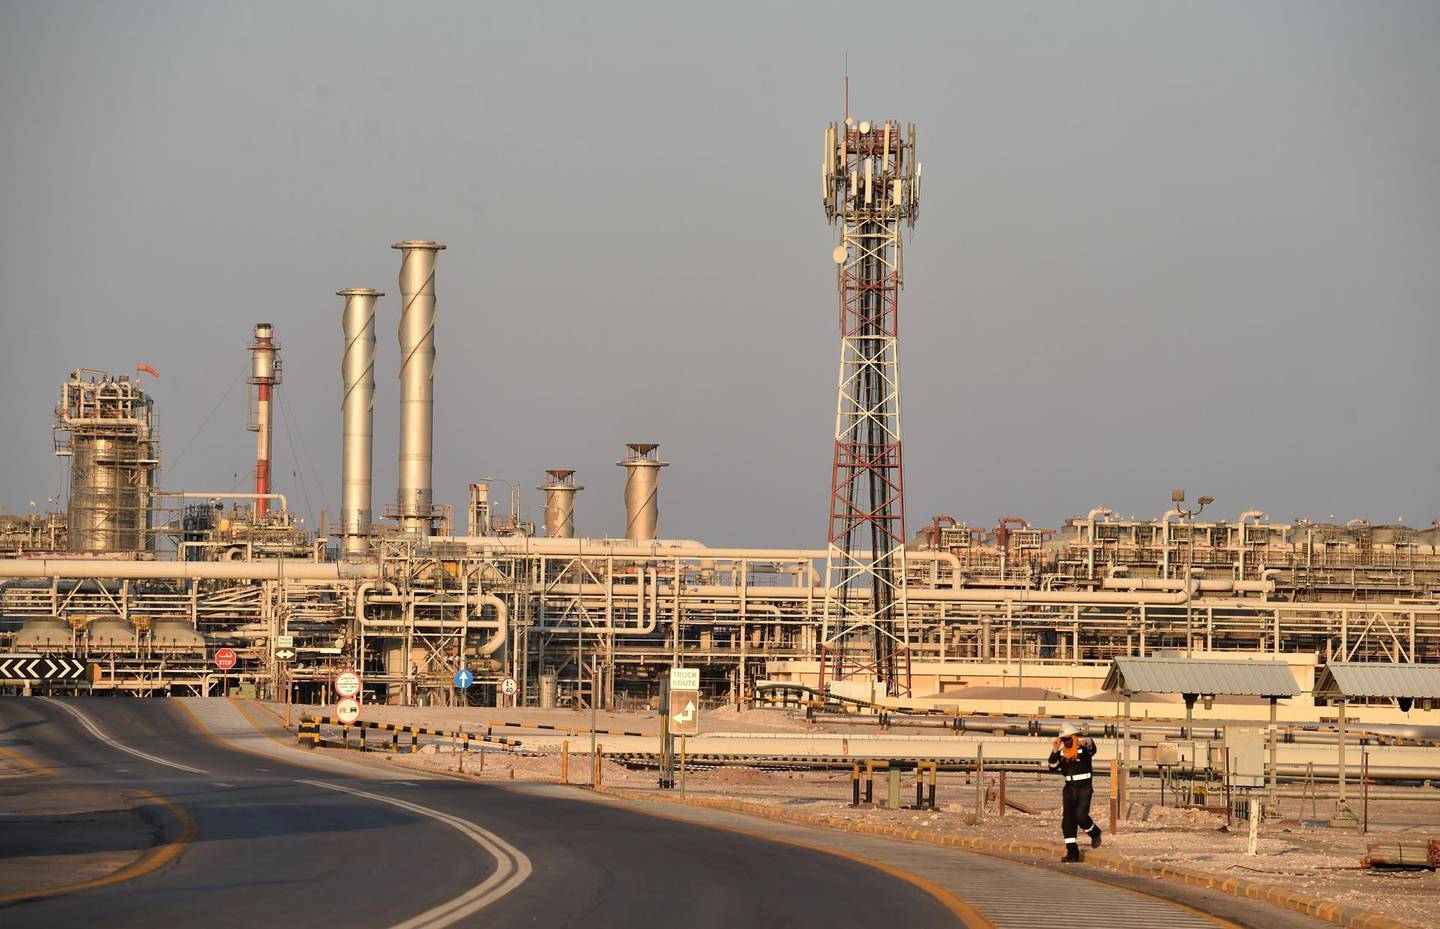 (FILES) In this file photo taken on September 20, 2019 shows a general view of Saudi Aramco's Abqaiq oil processing plant. British inflation hit a near four-year low in April as oil prices crashed, official data showed Wednesday, May 20, with the rate set to slide further as the coronavirus slashes prices generally. / AFP / Fayez Nureldine
